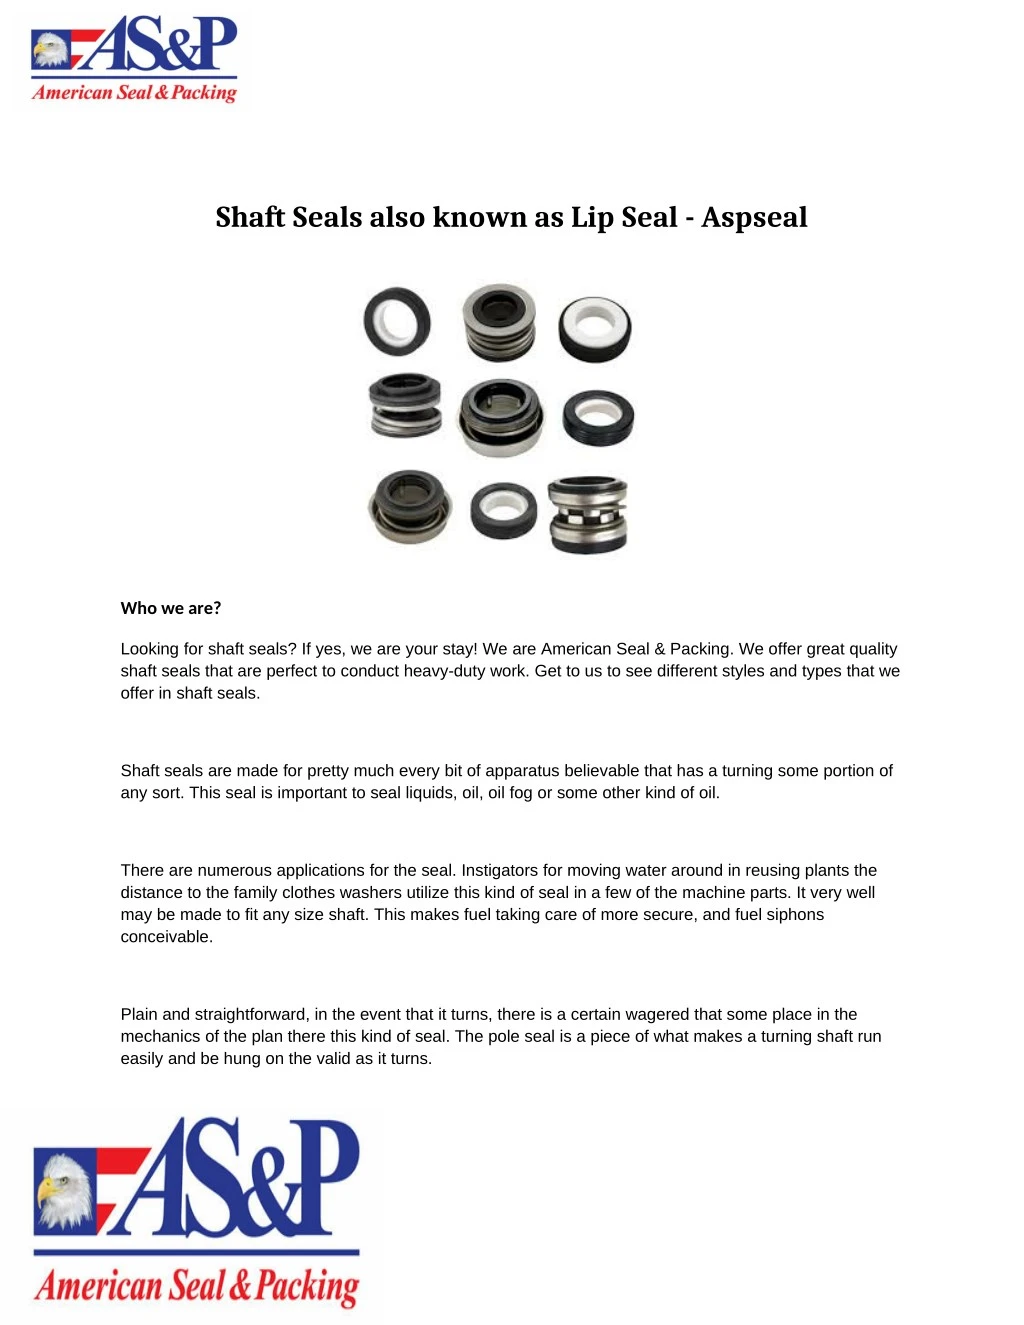 shaft seals also known as lip seal aspseal